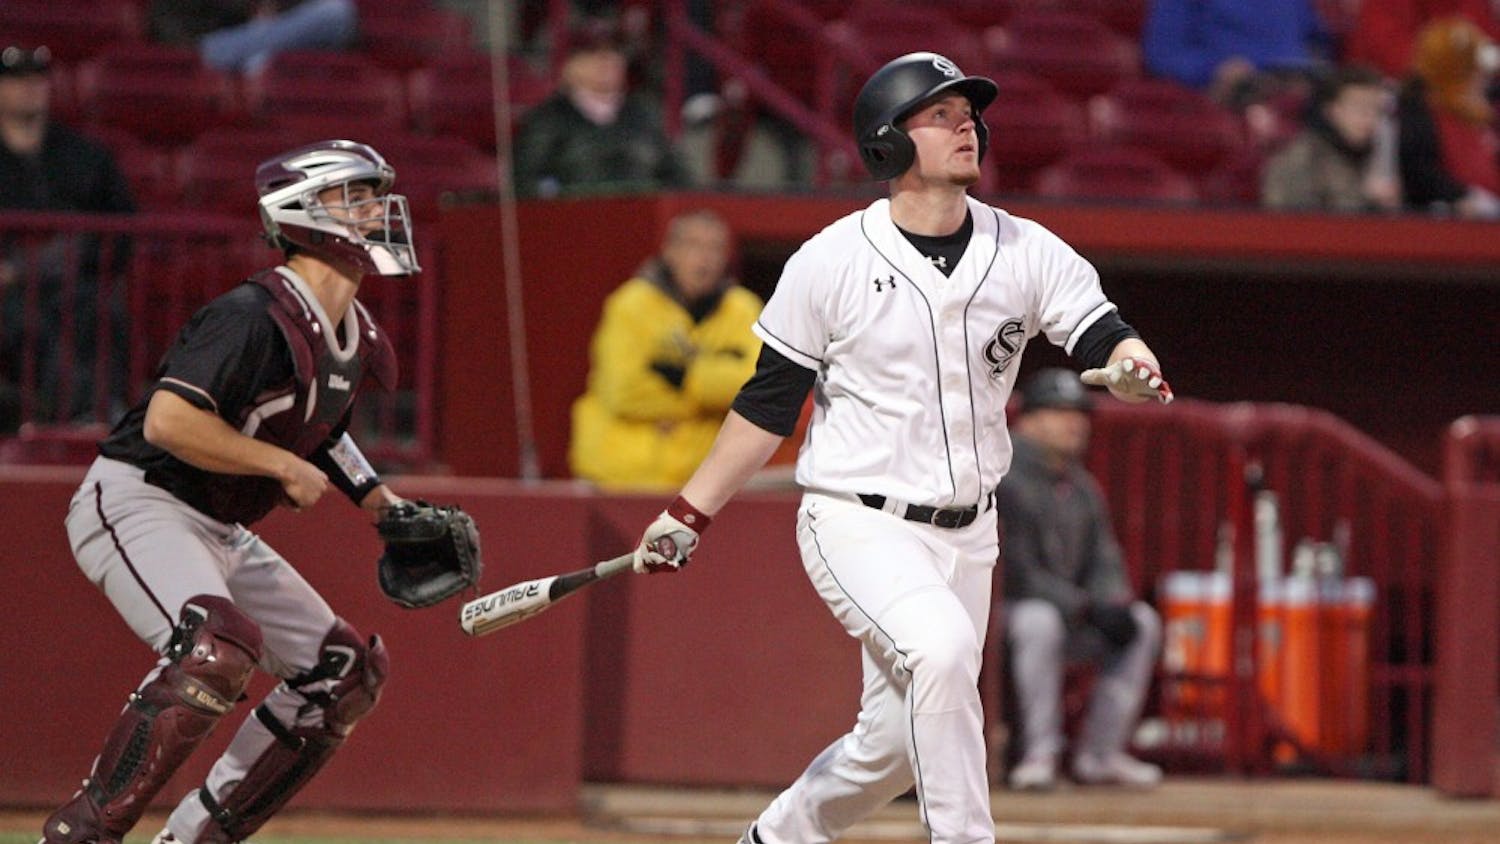 South Carolina's Alex Destino hits a go-ahead two-run home run in the sixth inning against College of Charleston at Carolina Stadium in Columbia, S.C., on Saturday, Feb. 14, 2015. The host Gamecocks defeated the Cougars, 8-3, in the completion of a game halted by weather on Friday. (Dwayne McLemore/The State/TNS)